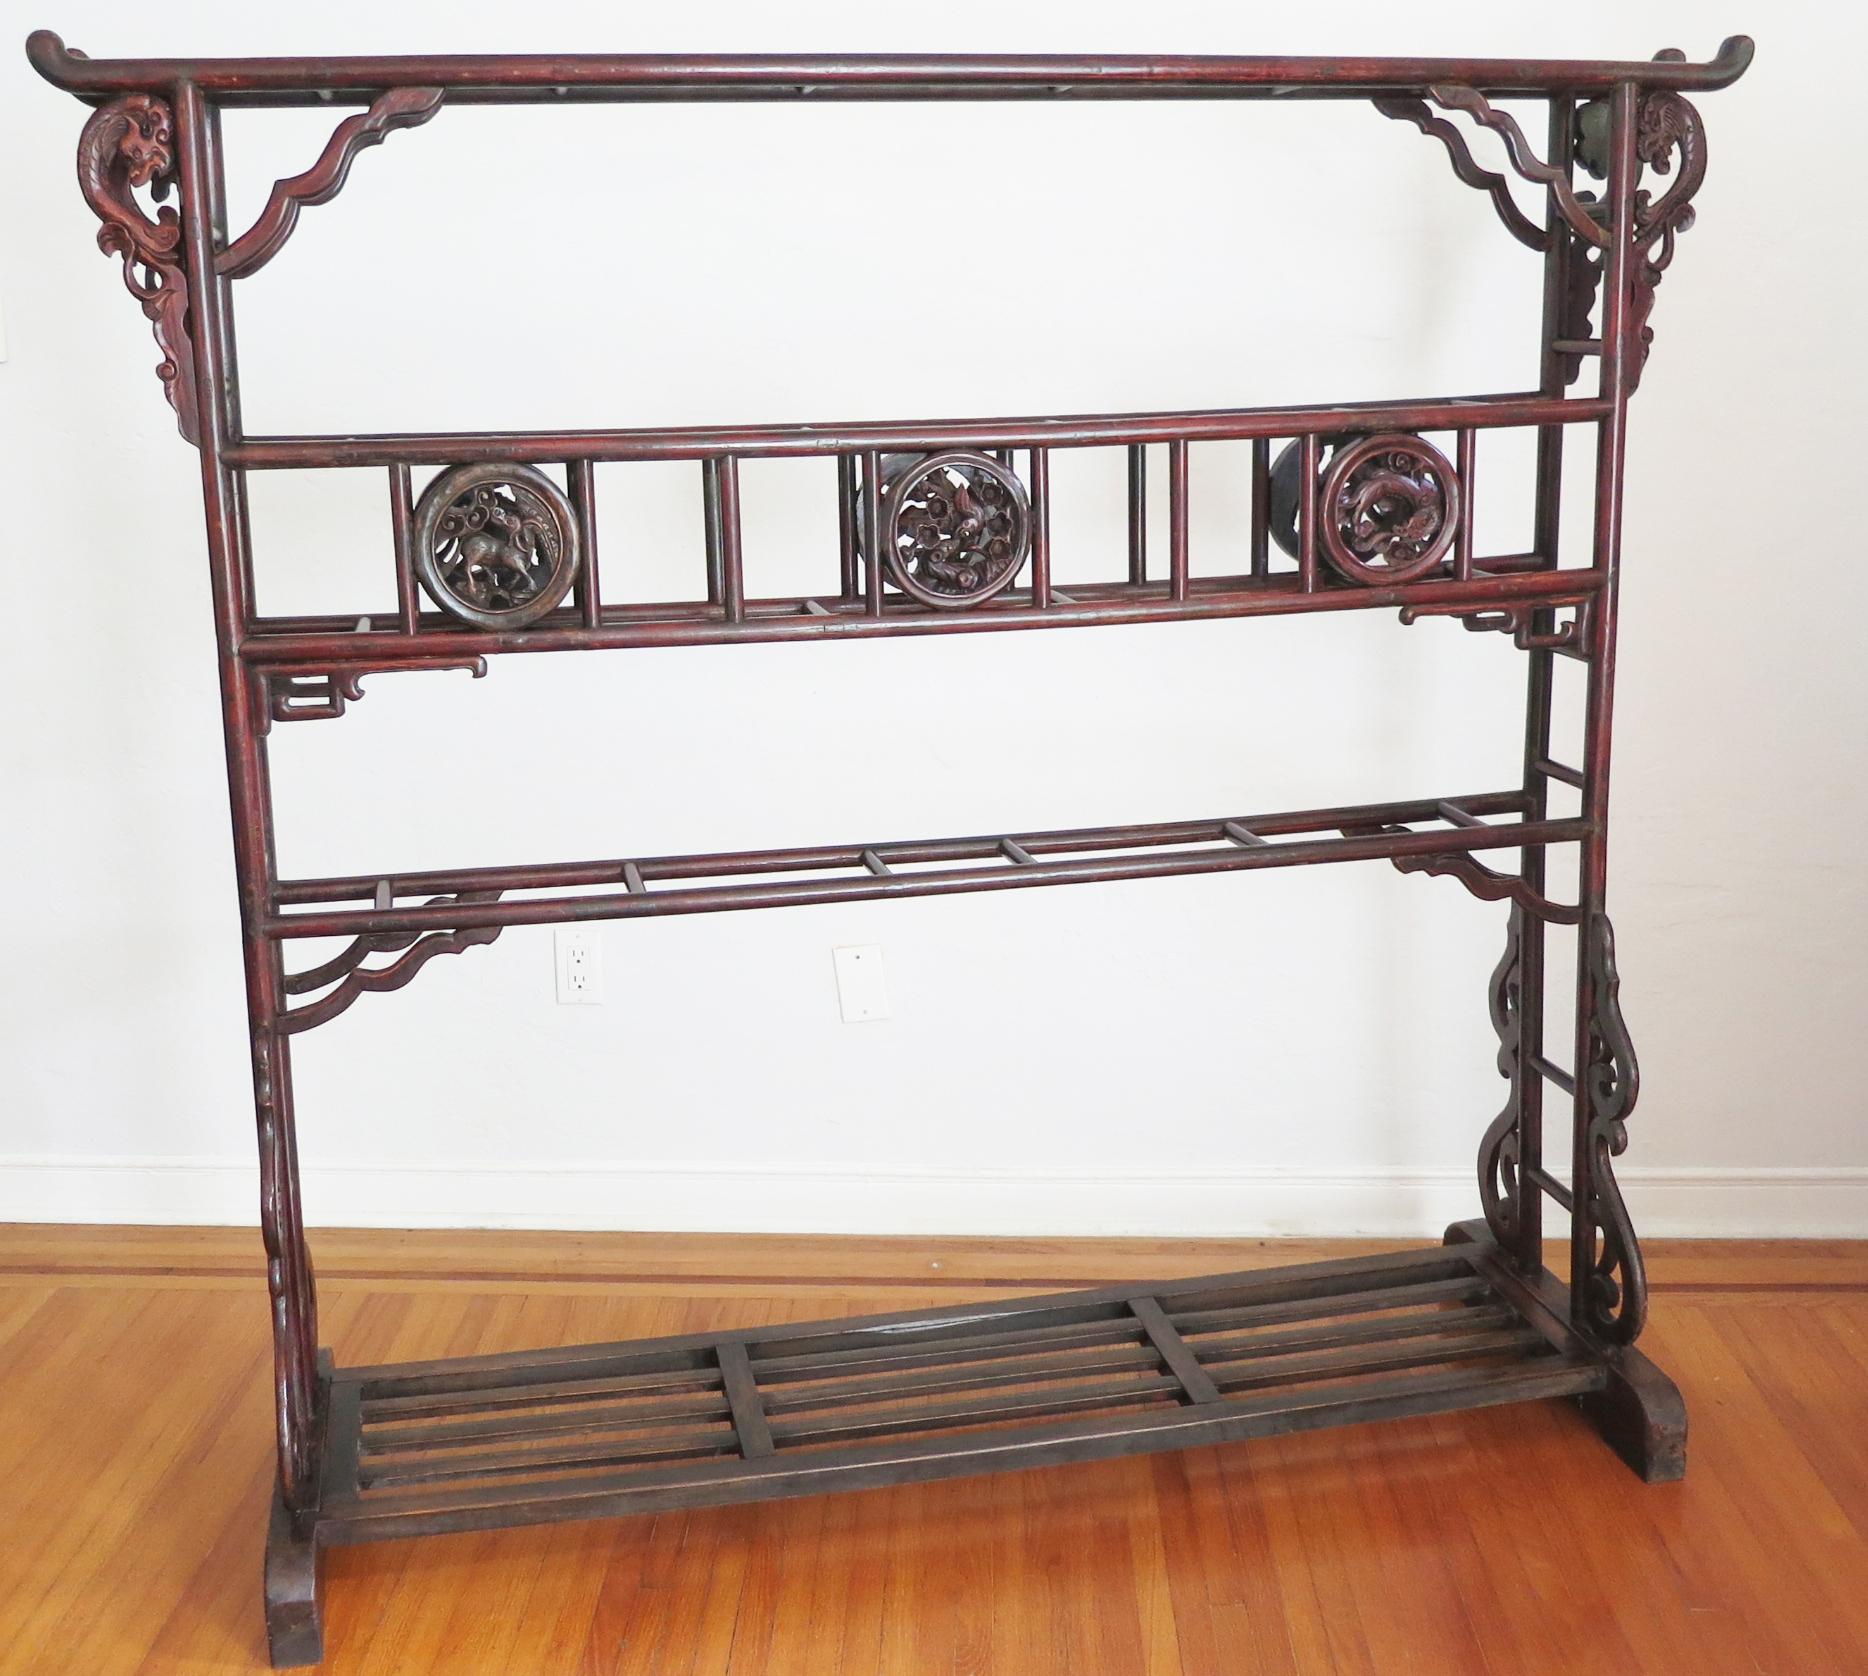 This large Chinese oxblood colored lacquered robe rack is carved from Northern Elm (yumu) and is from the Shanxi Province of China. These robe racks were design to drape the ornate silk robes over the top of the racks and typically they were kept in